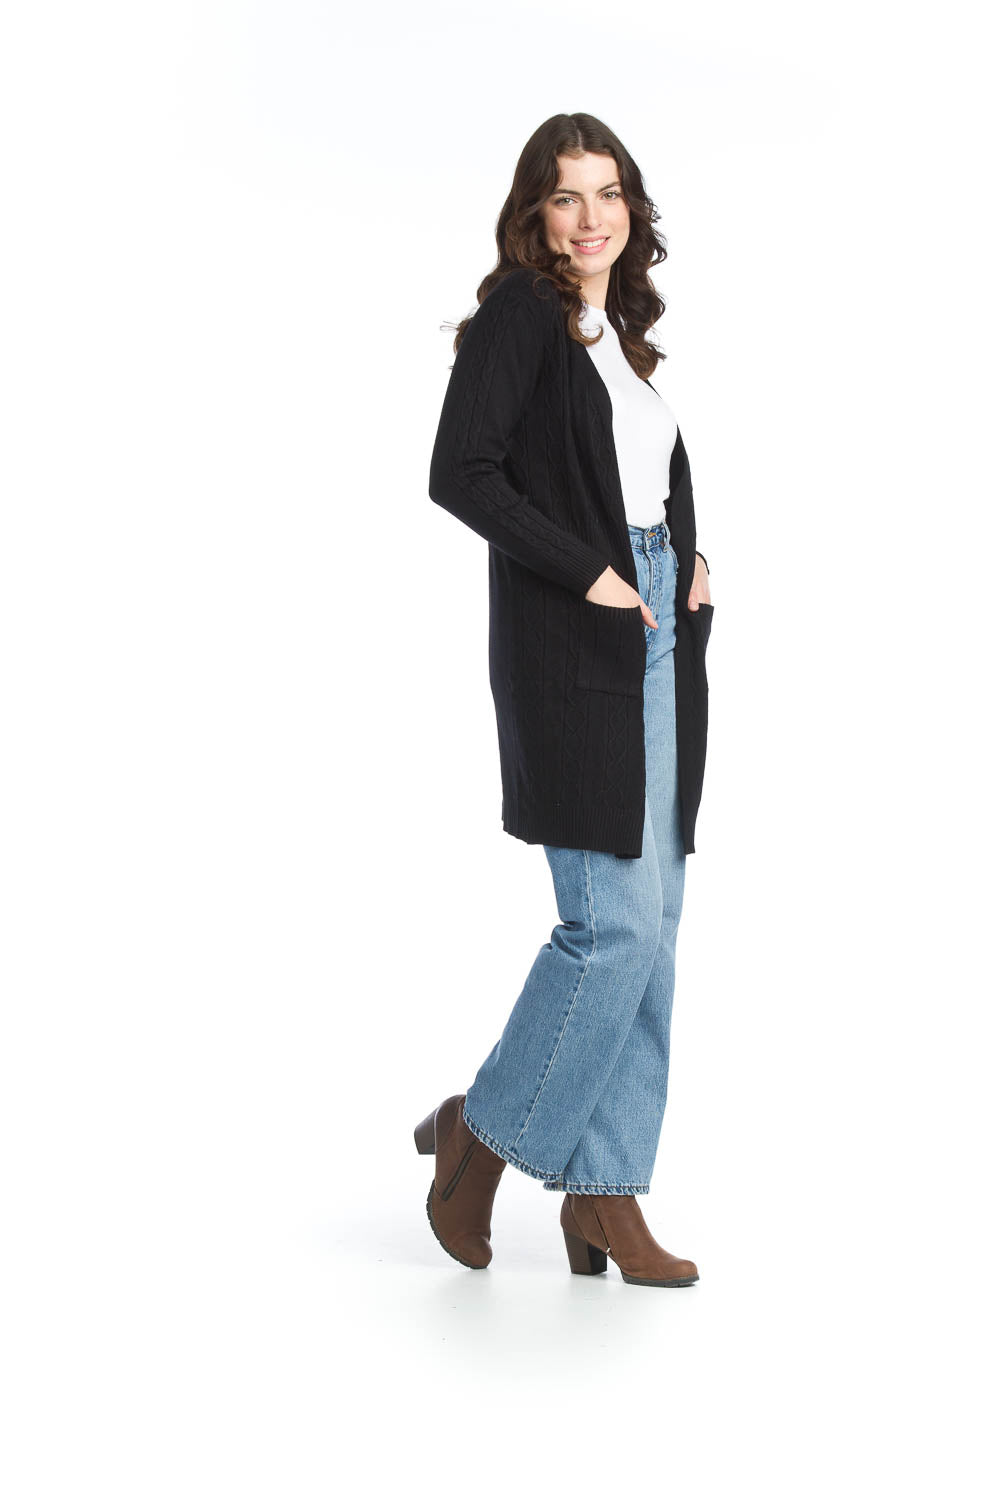 PAPILLON SOFT CABLE KNIT BLACK CARDIGAN WITH POCKETS